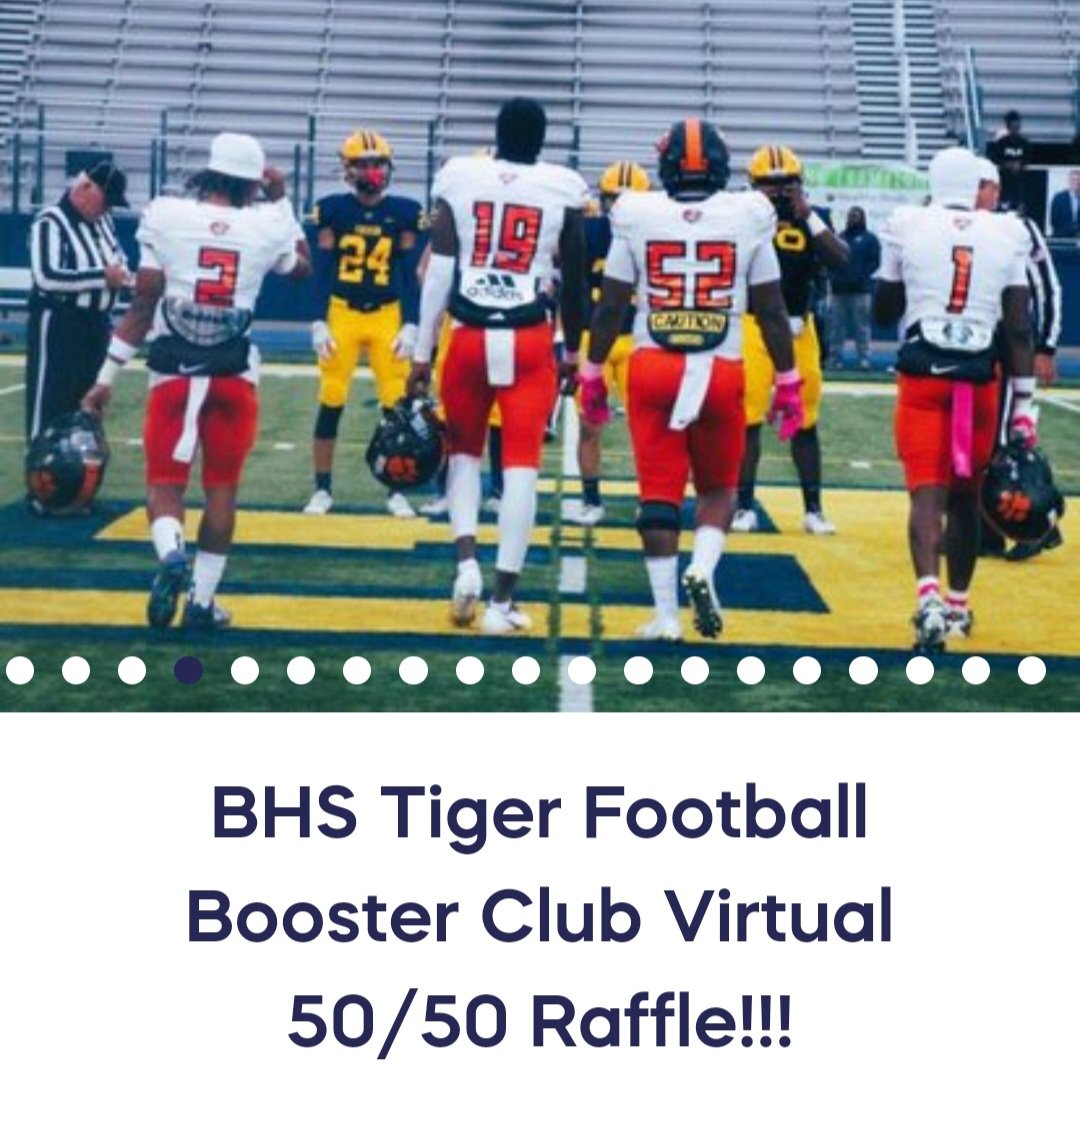 Belleville Virtual 50/50. Support your Tigers & Win!! tigers.rallyup.com/e4b081